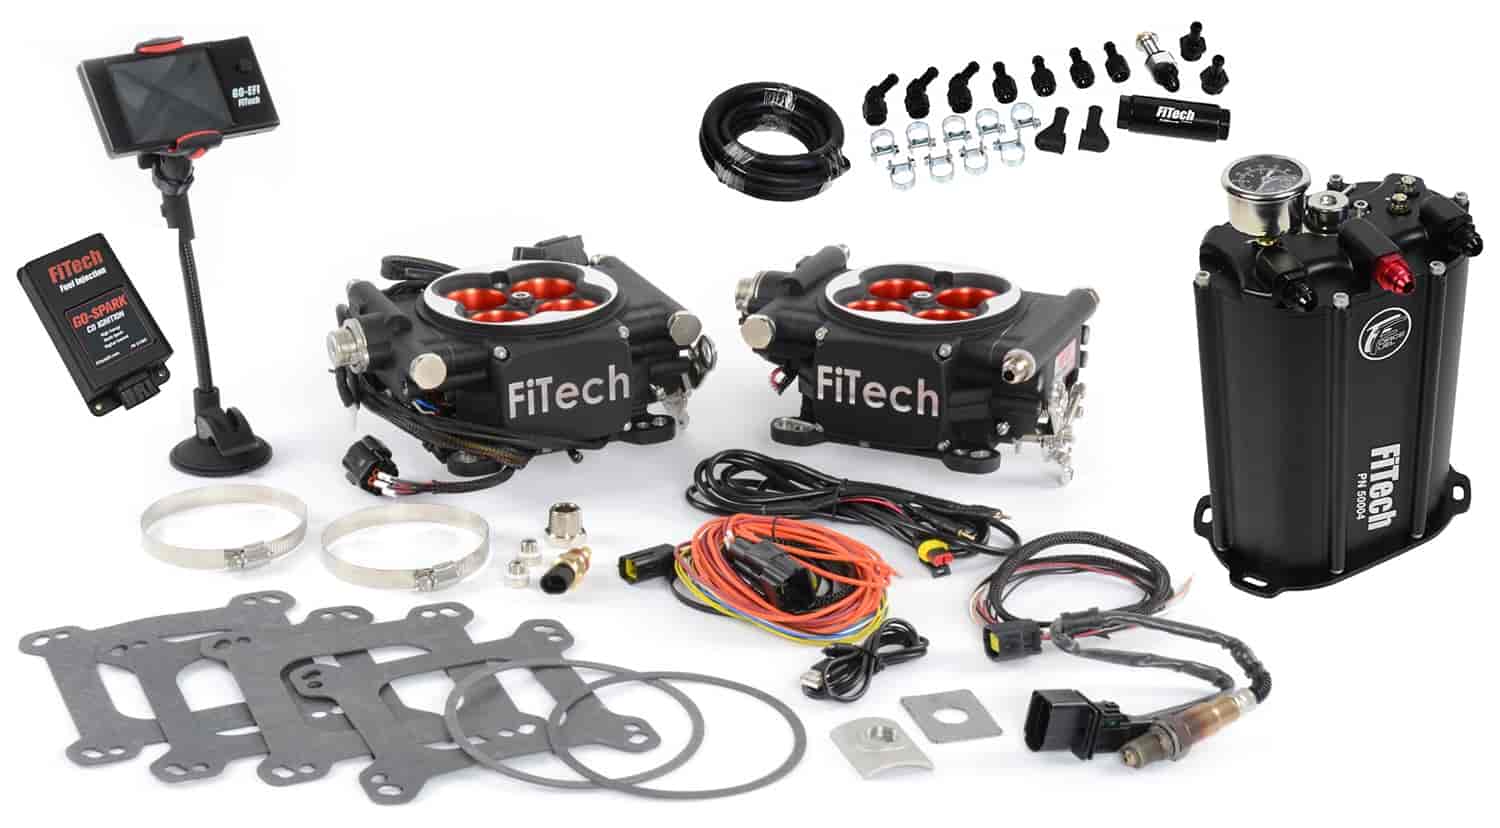 Go EFI 2x4 625 HP Dual Quad Throttle Body Fuel Injection Master Kit [With Force Fuel System & CDI Box] Matte Black